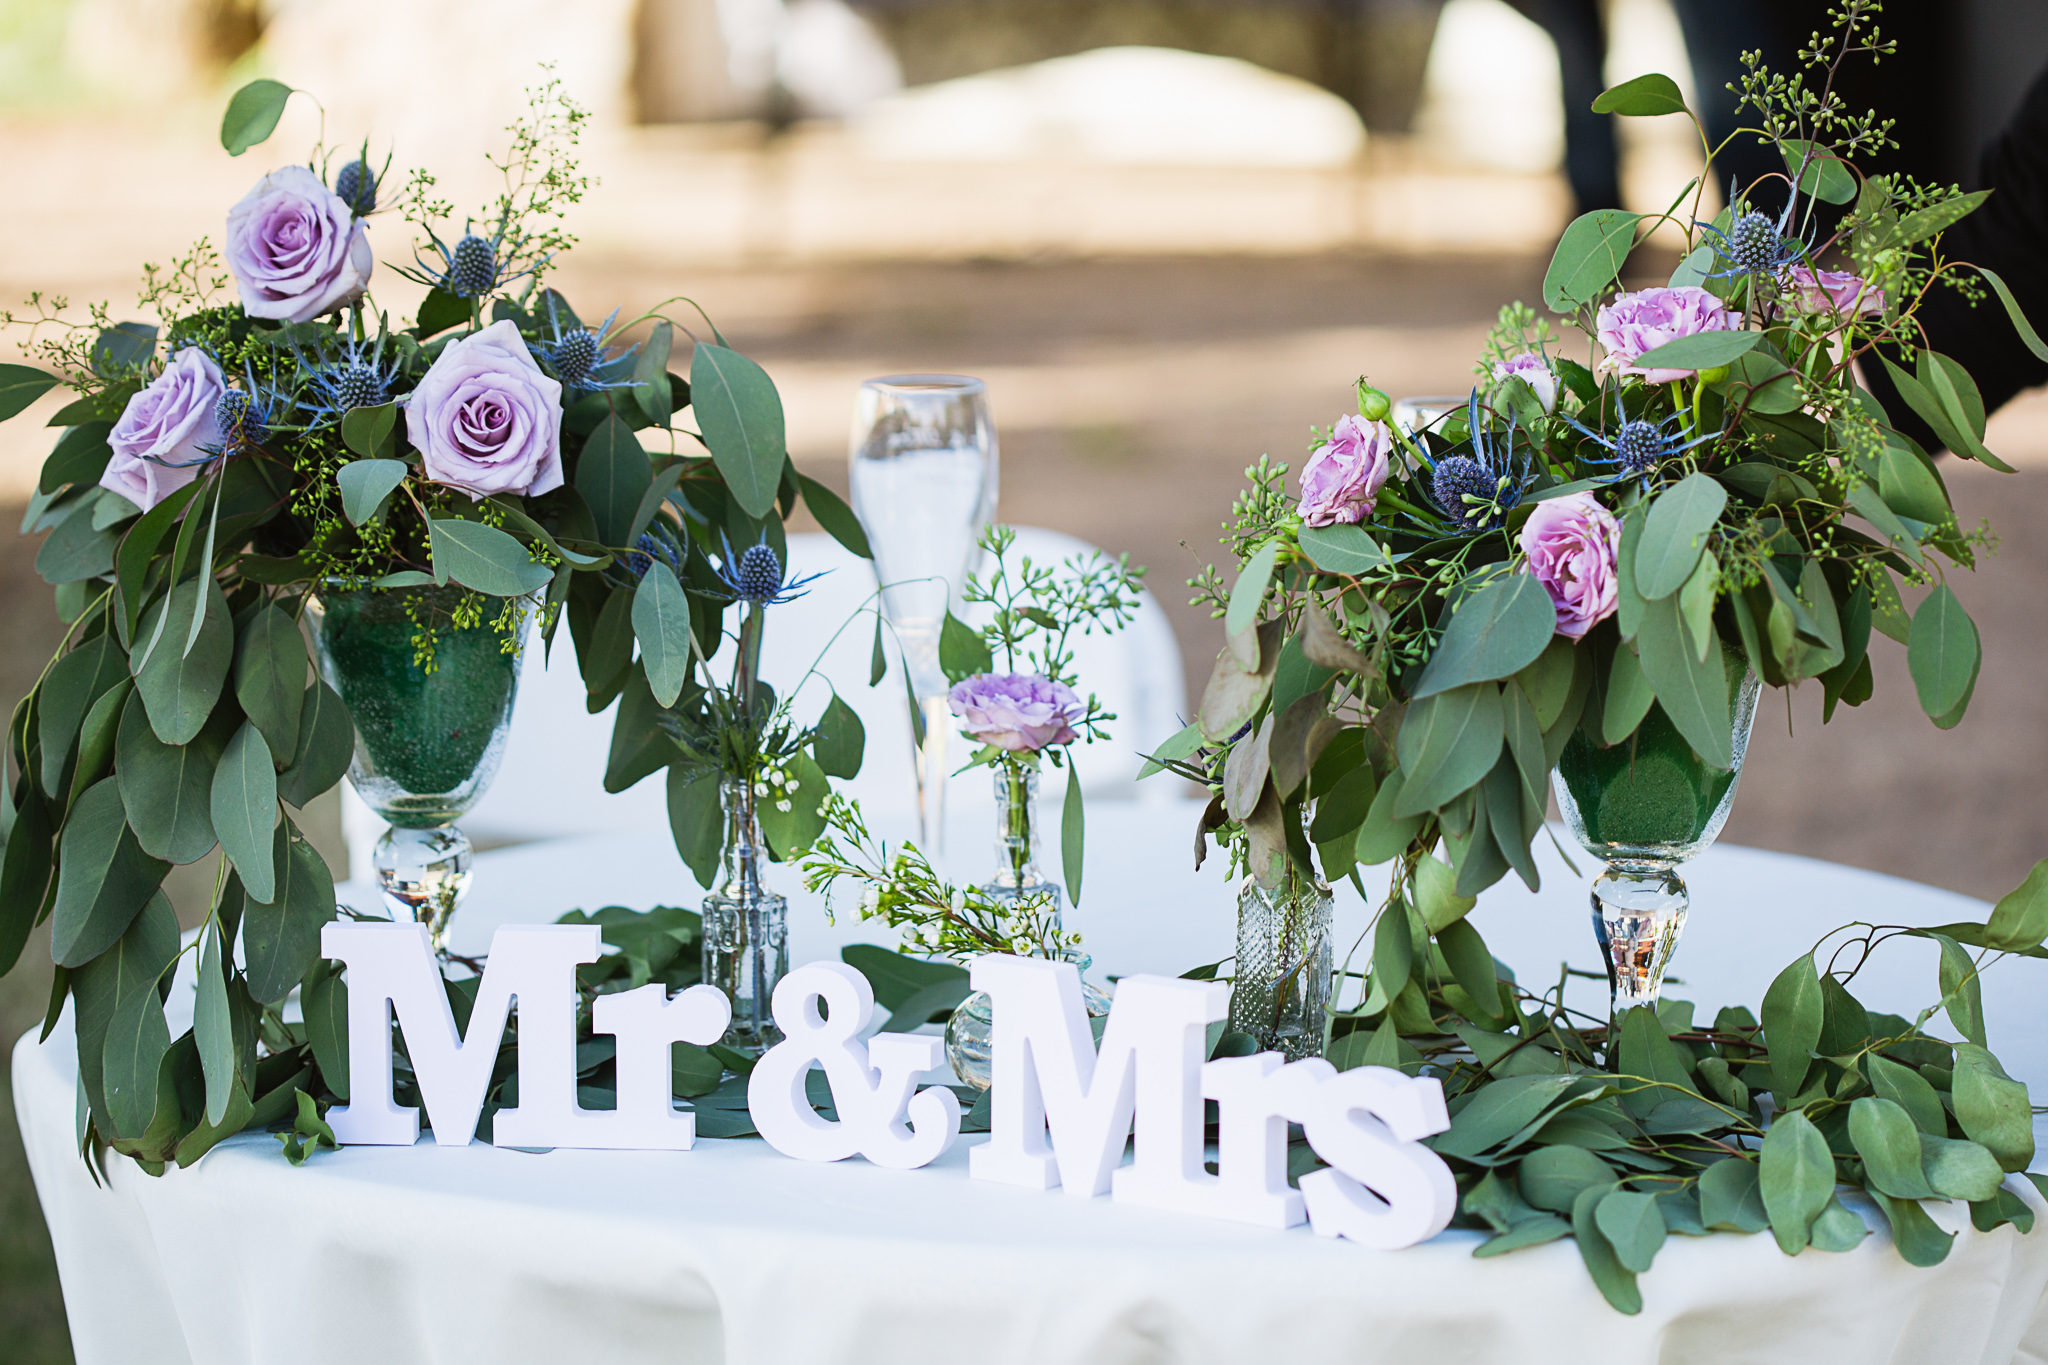 Sweetheart table decorated with eucalyptus and lavender roses by PMA Photography.